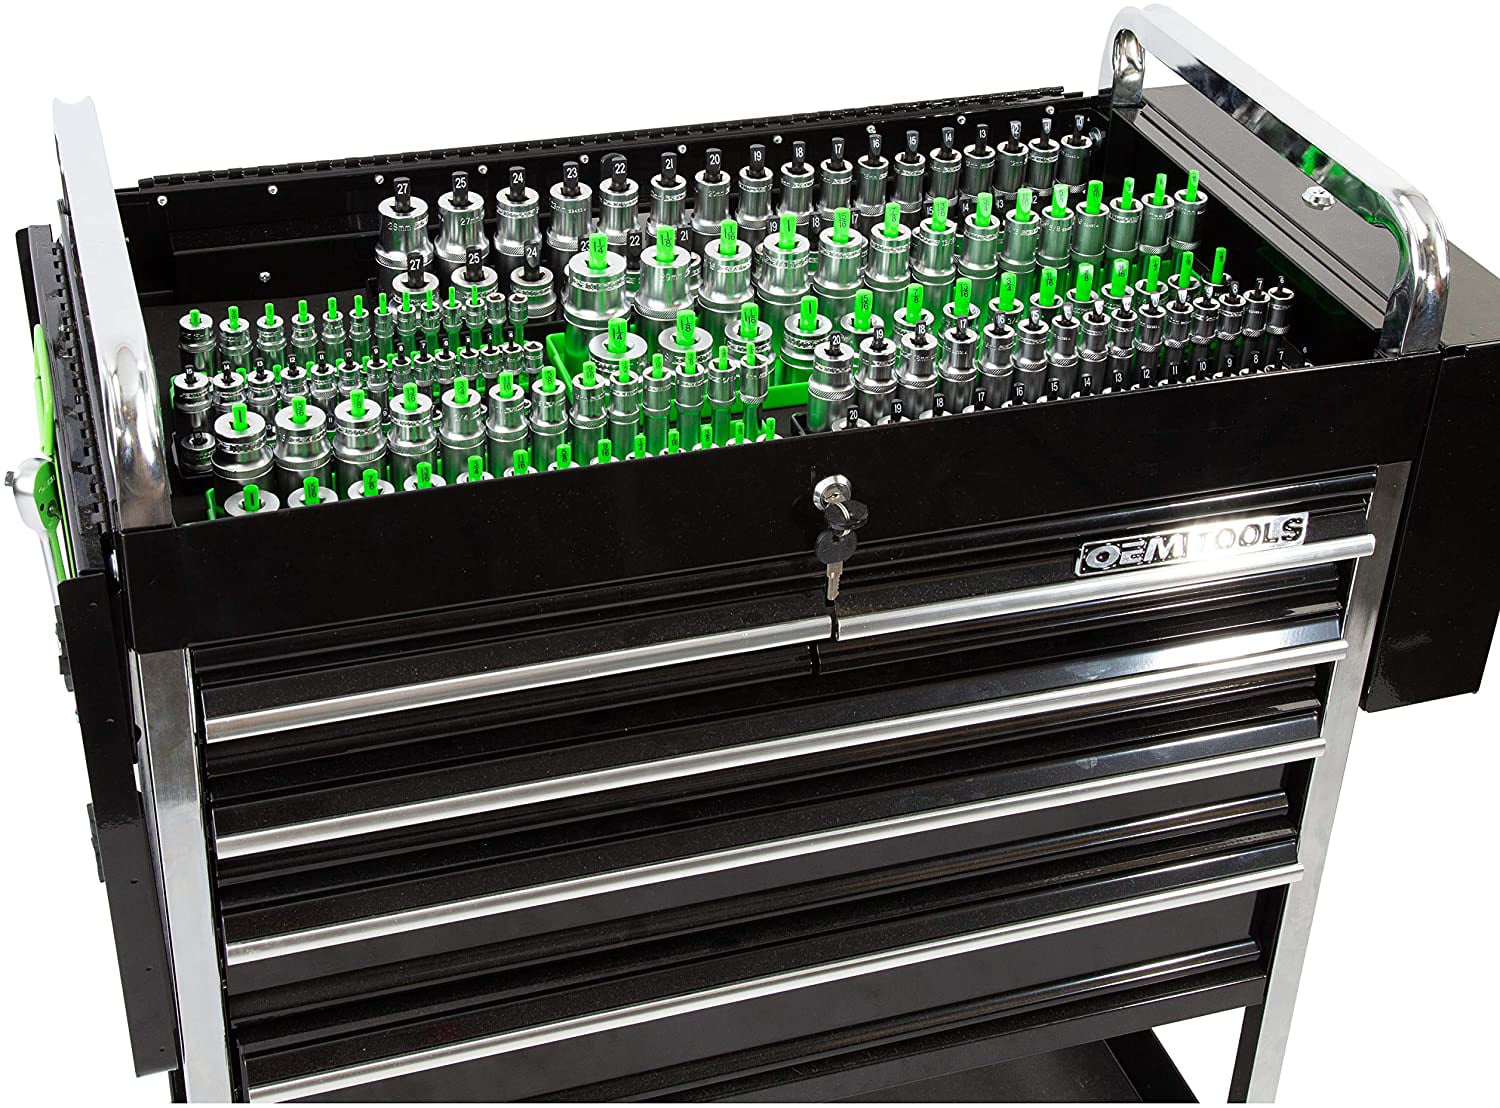 Socket Rails, Details about   Oemtools 22233 6 Piece Socket Tray Organizer Set Green And Black 